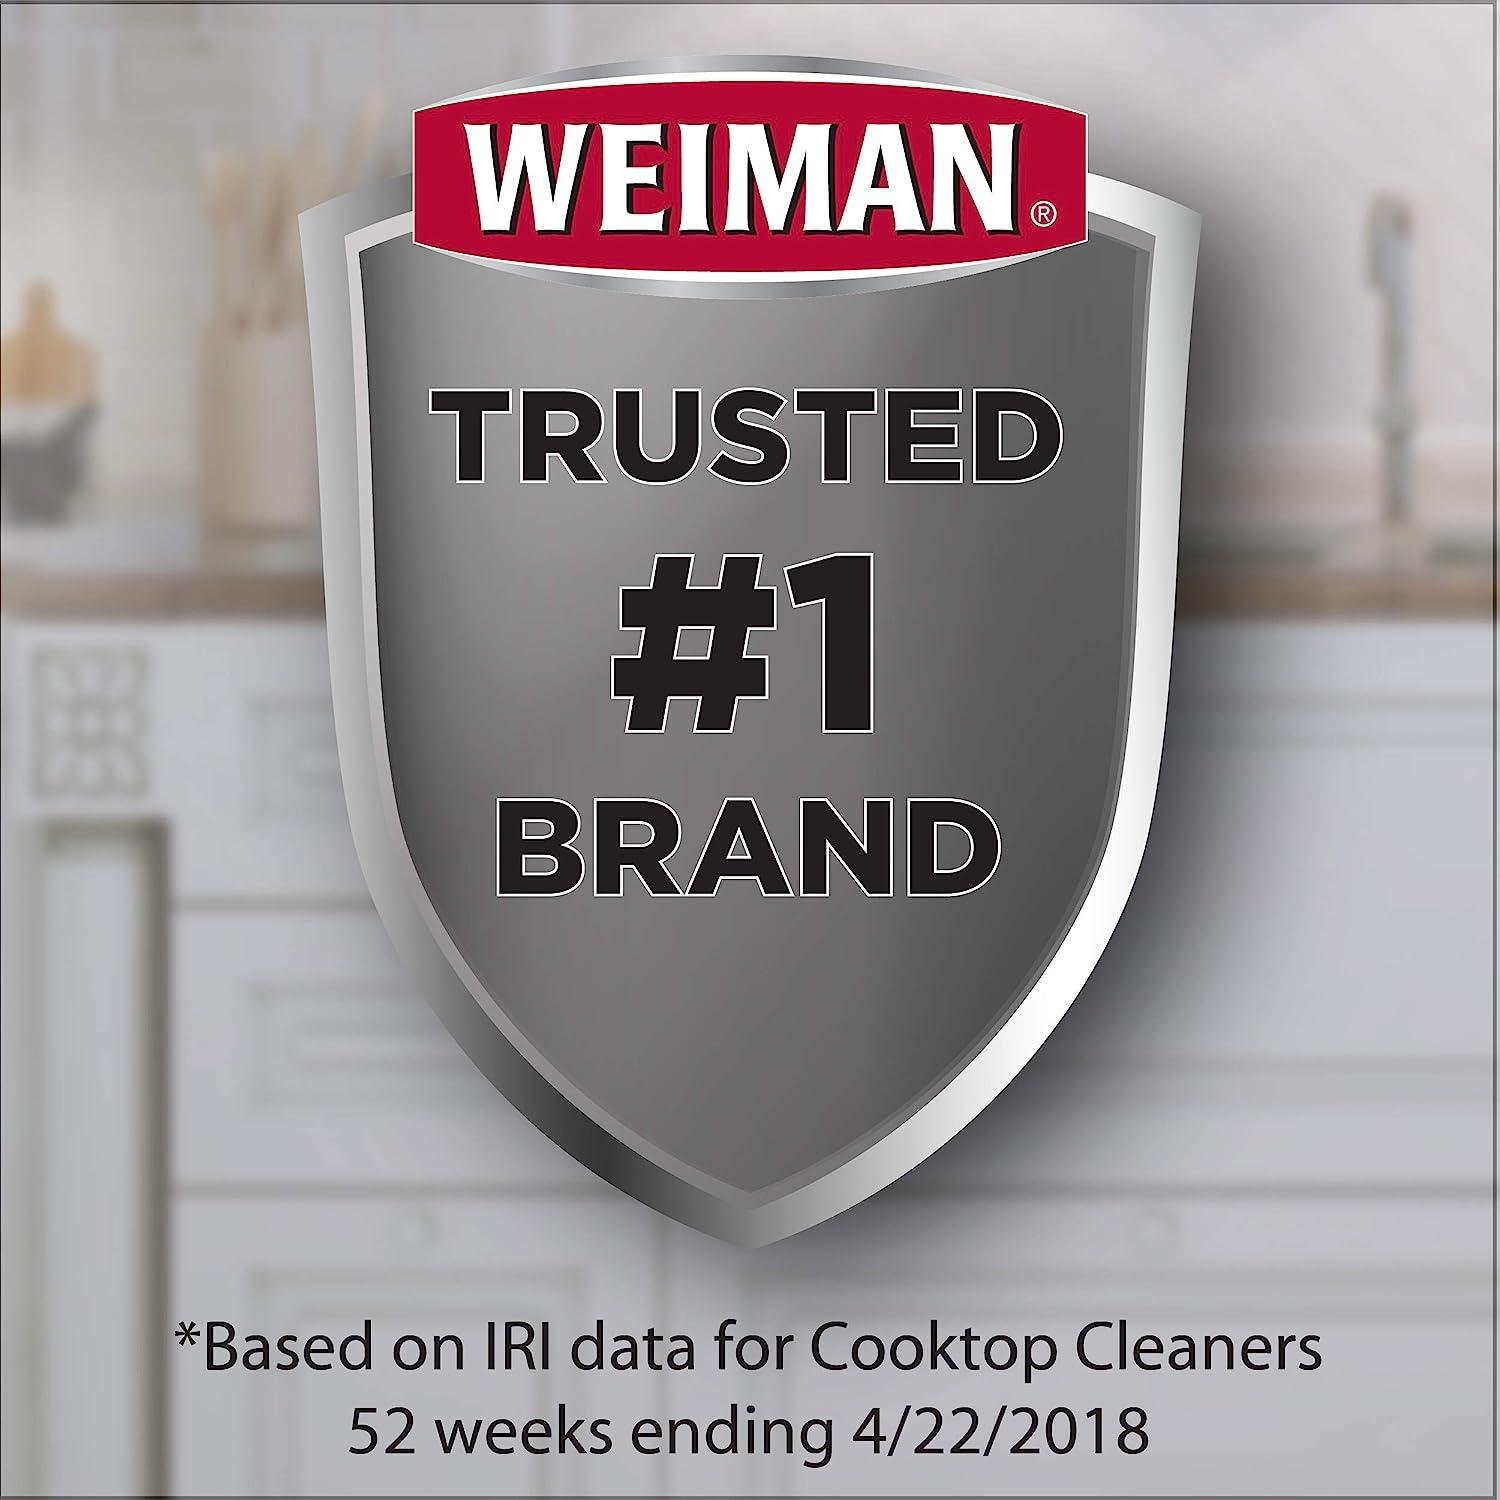 Weiman Cooktop Cleaner for Daily Use (2 Pack) Streak Free, Residue Free, Non-Abrasive Formula - 22 fl oz